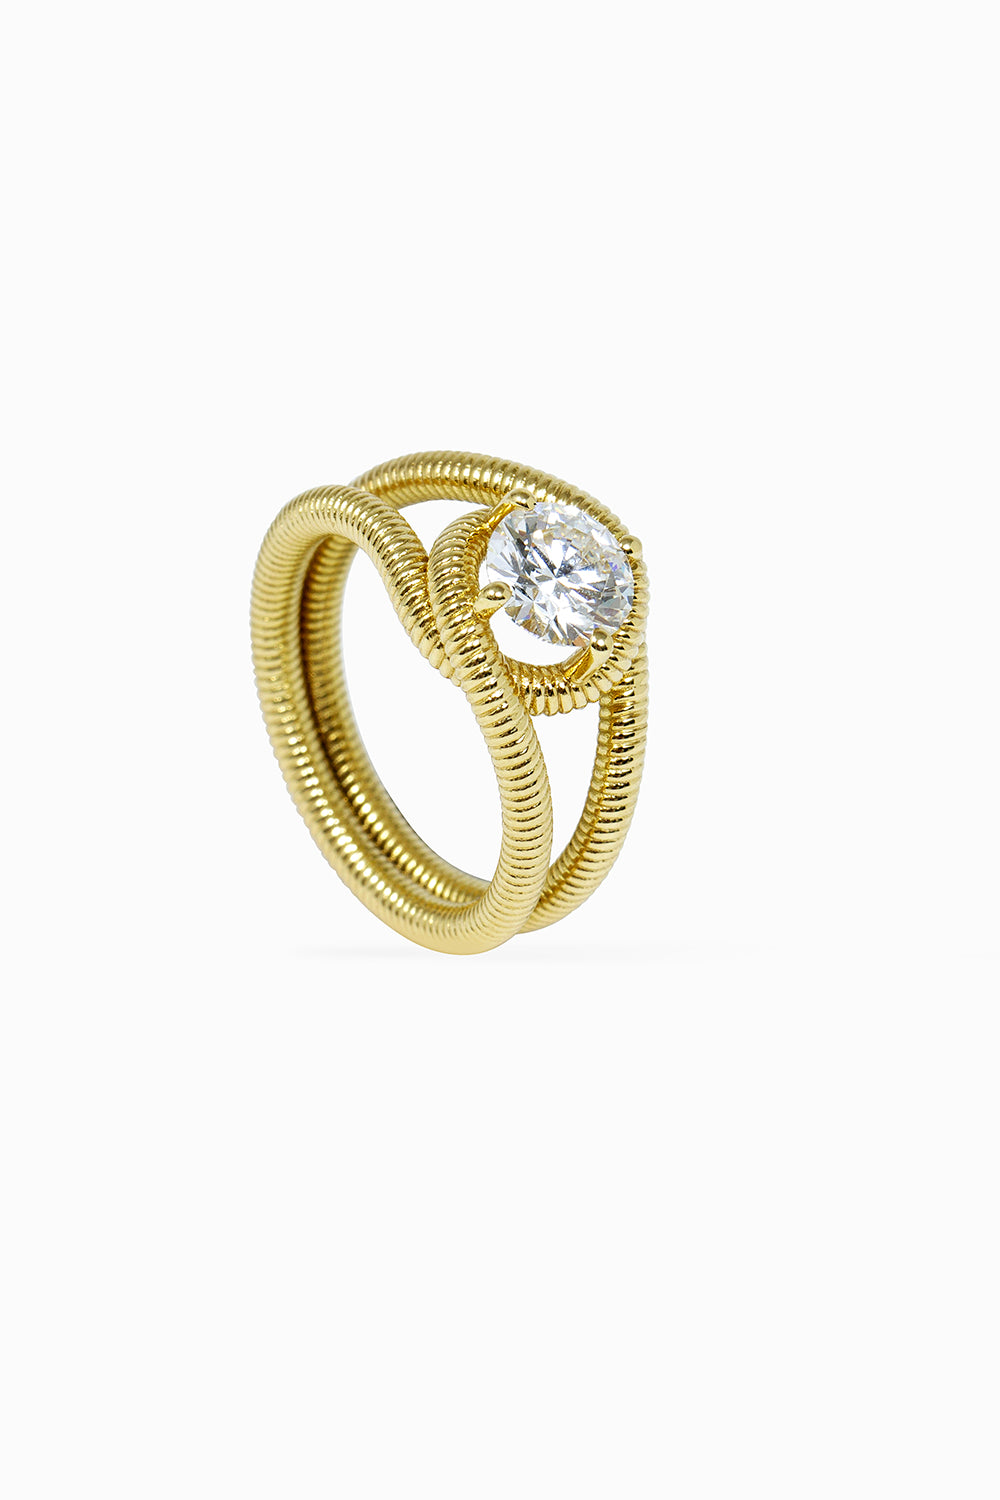 Hug solitaire ring